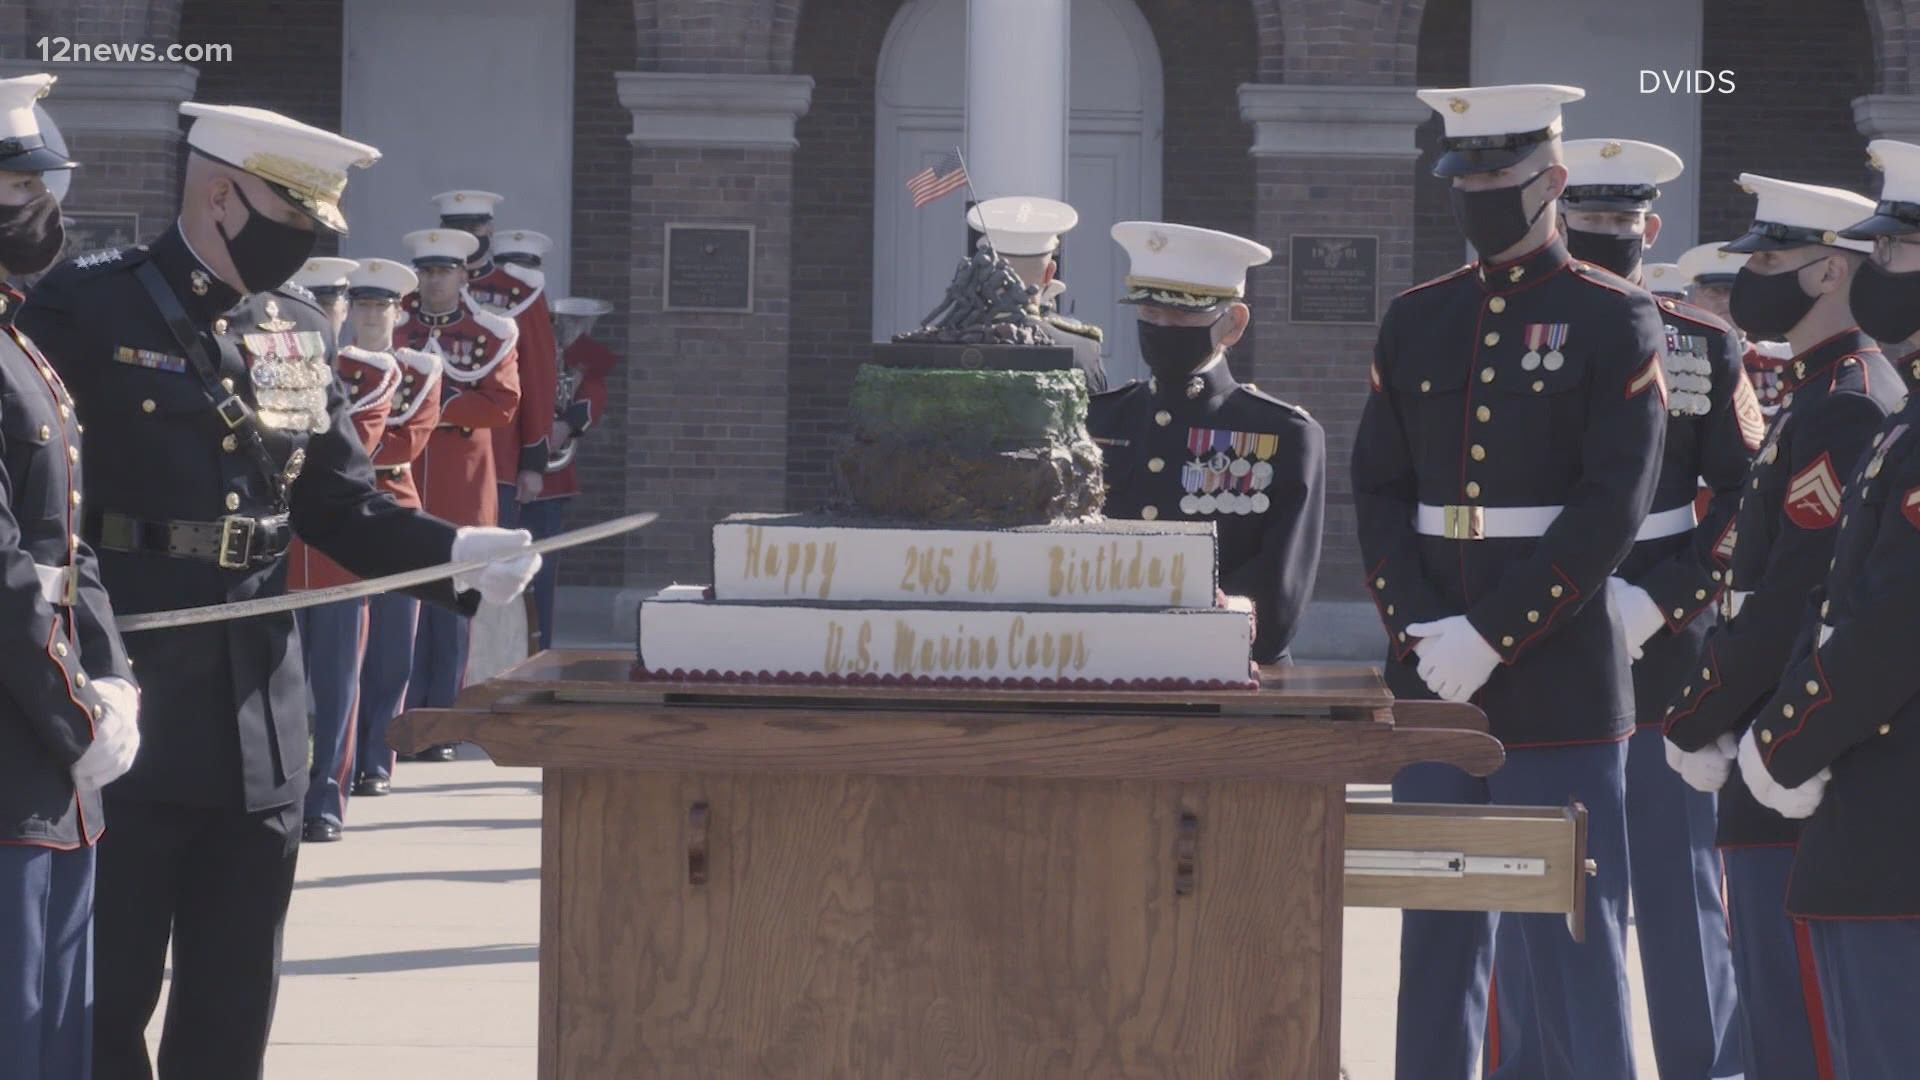 Tuesday marks the 245th birthday of the United States Marine Corps. 12 News spoke to a Marine about the pride that comes with serving in that branch of the military.